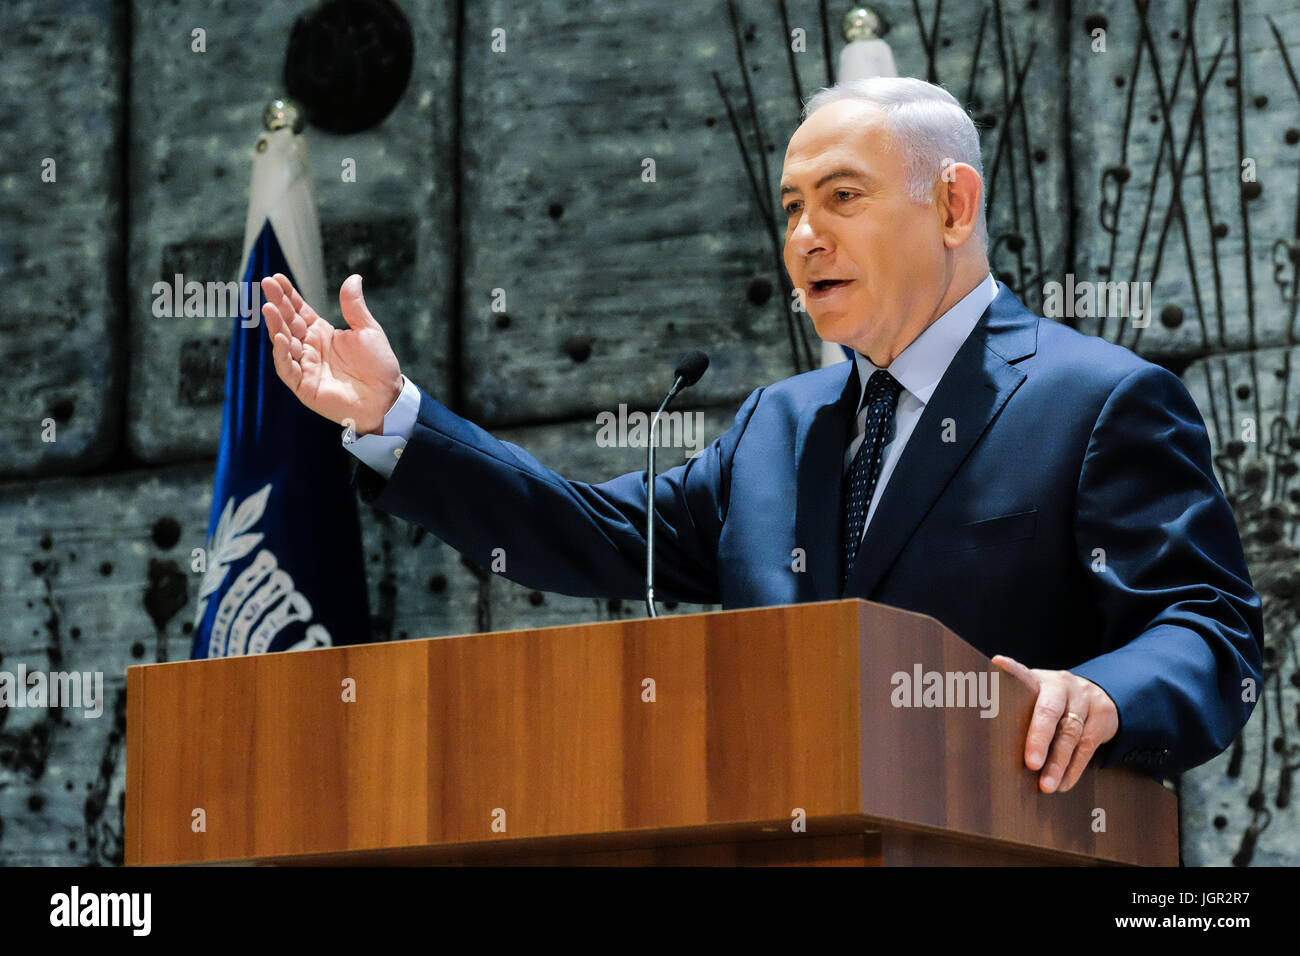 Jerusalem, Israel. 10th July, 2017. Israeli Prime Minister BENJAMIN NETANYAHU delivers a statement in a welcoming ceremony for Rwandan President Kagame hosted by Israeli President Rivlin at the President's Residence. Netanyahu's presence exceeds traditional diplomatic protocol. Credit: Nir Alon/Alamy Live News Stock Photo